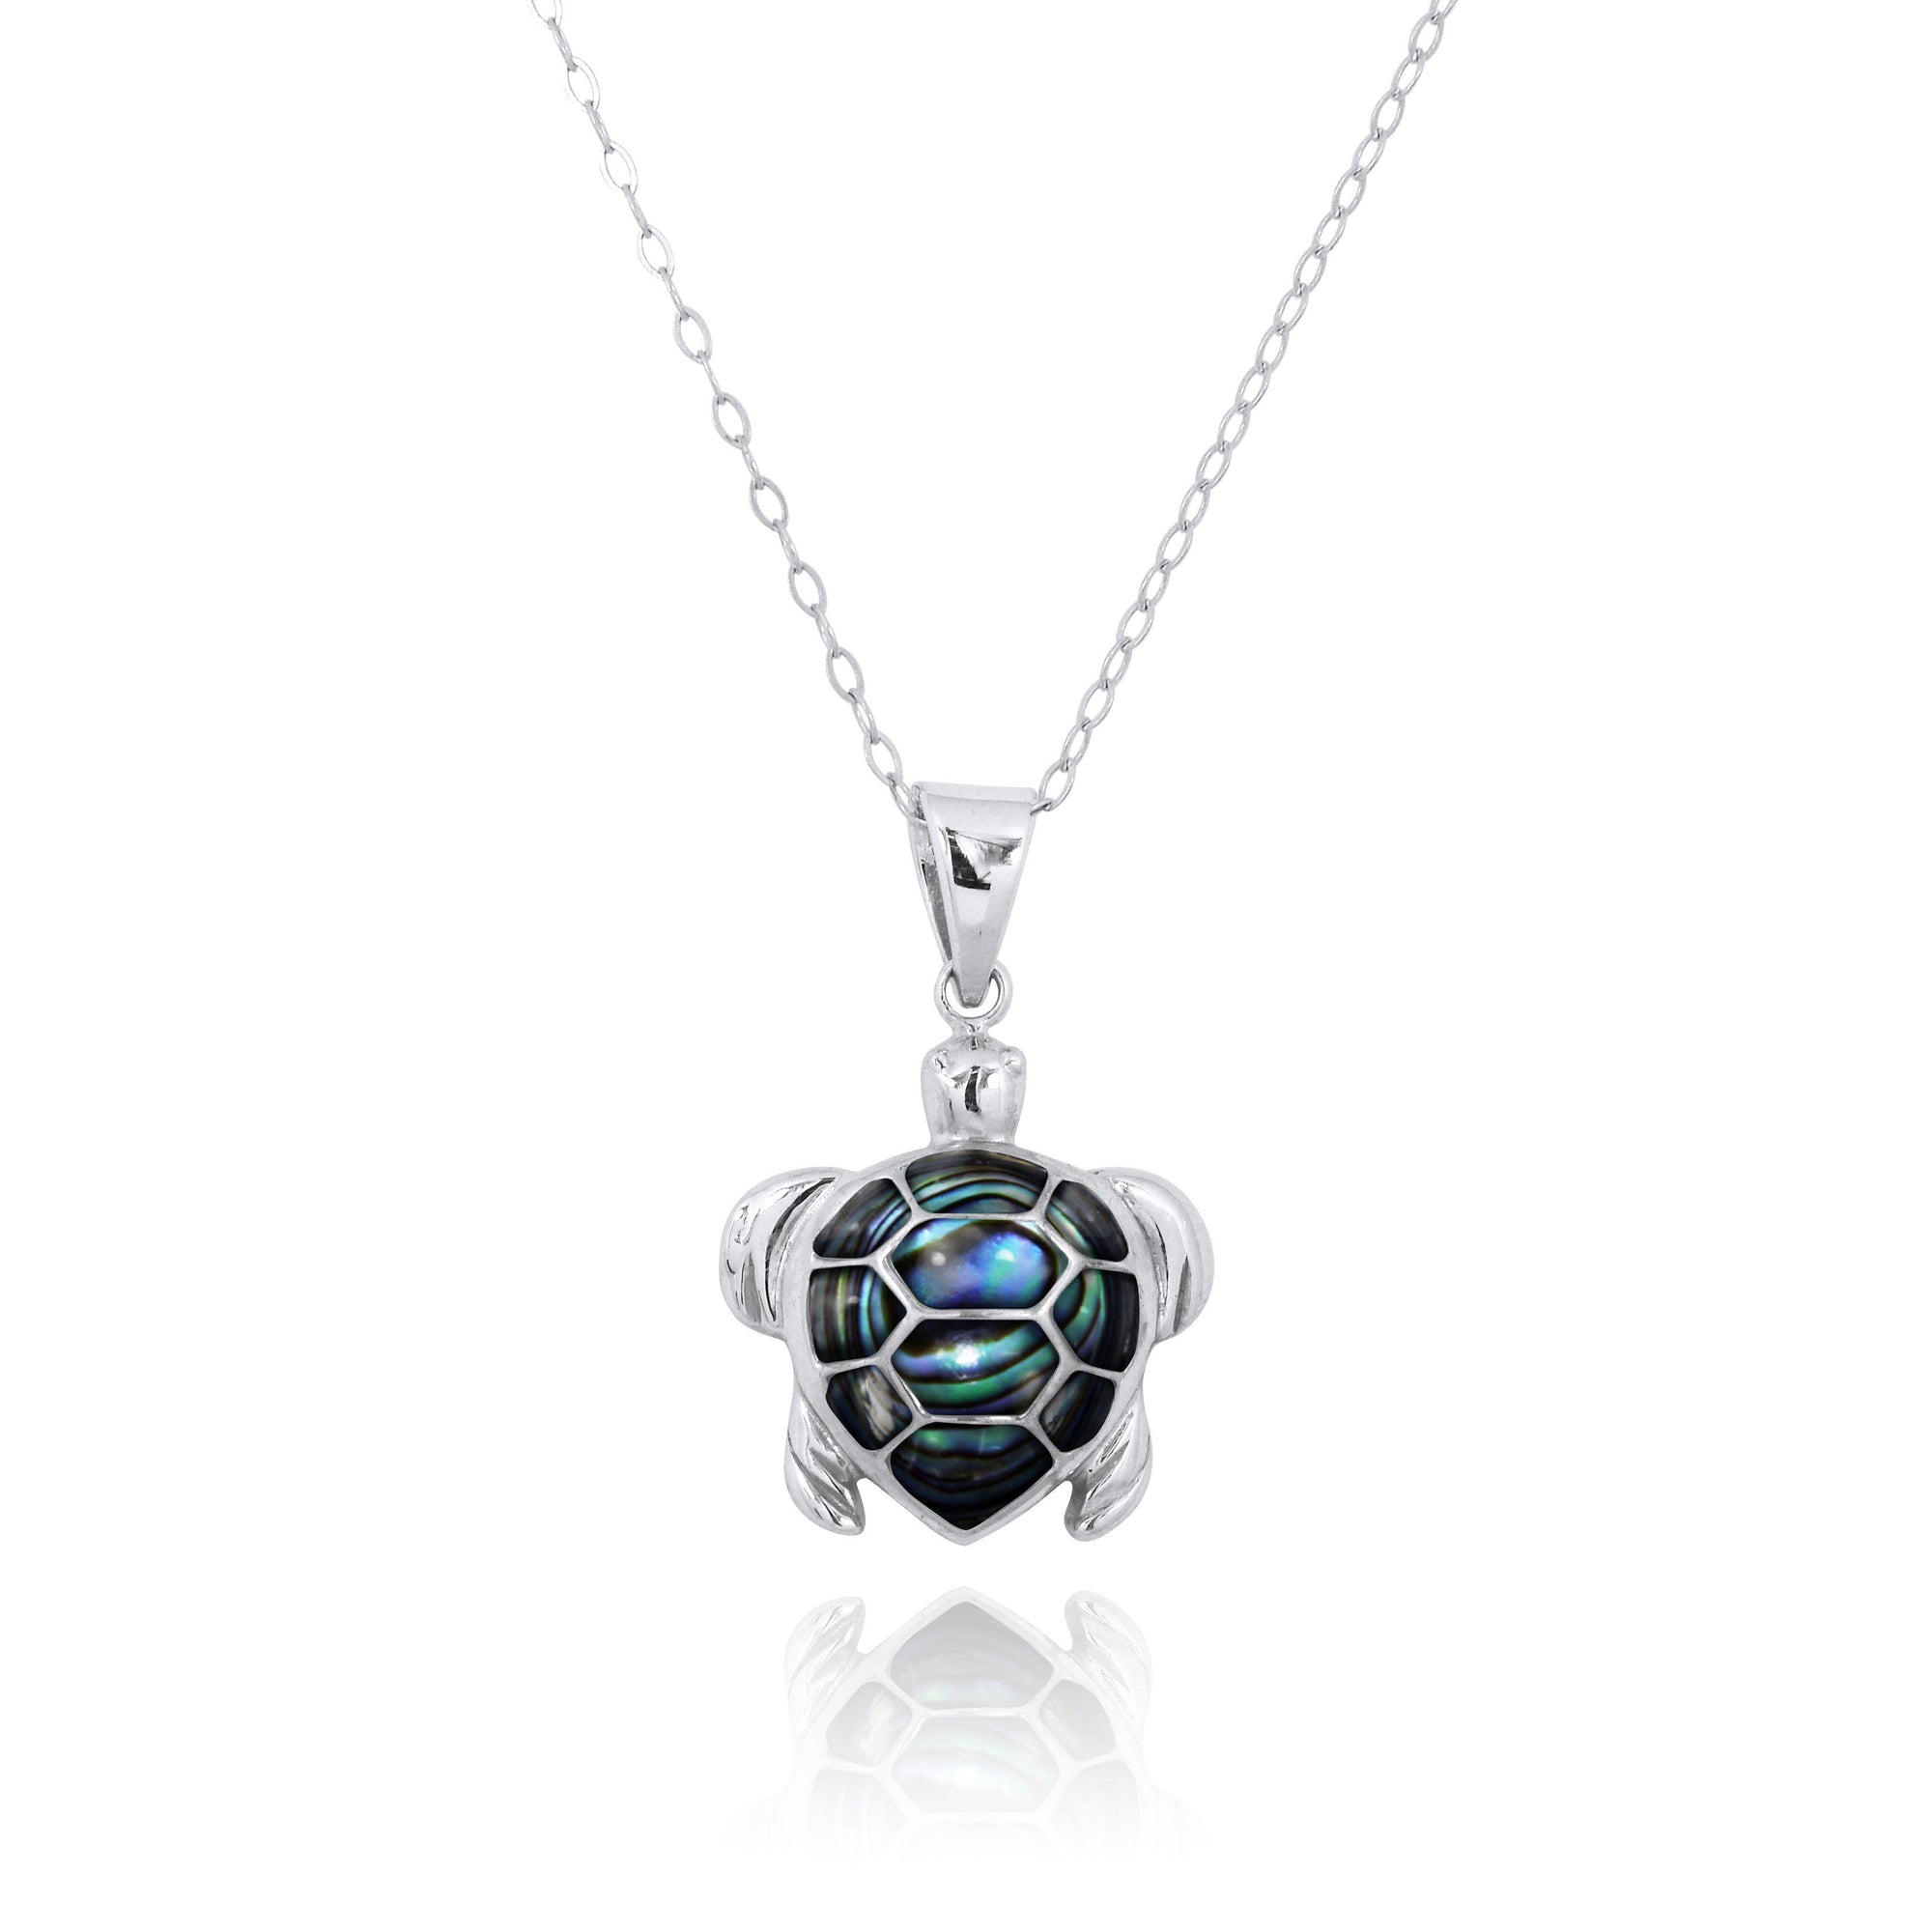 Turtle Pendant Necklace with Abalone Shell